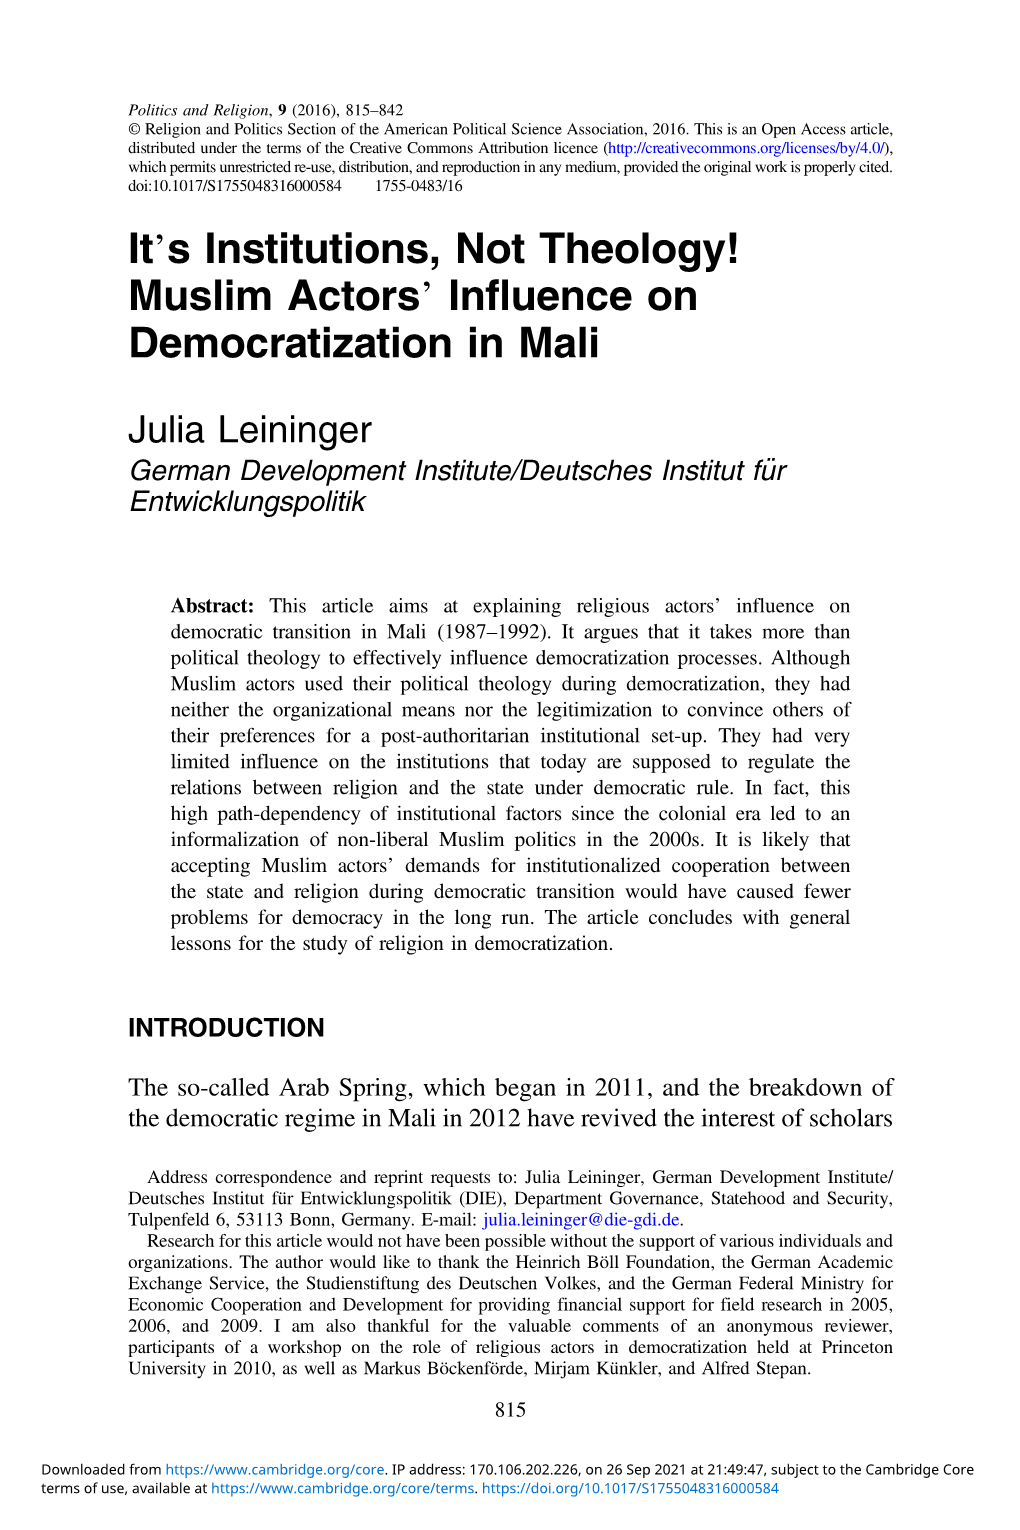 It's Institutions, Not Theology! Muslim Actors' Influence On